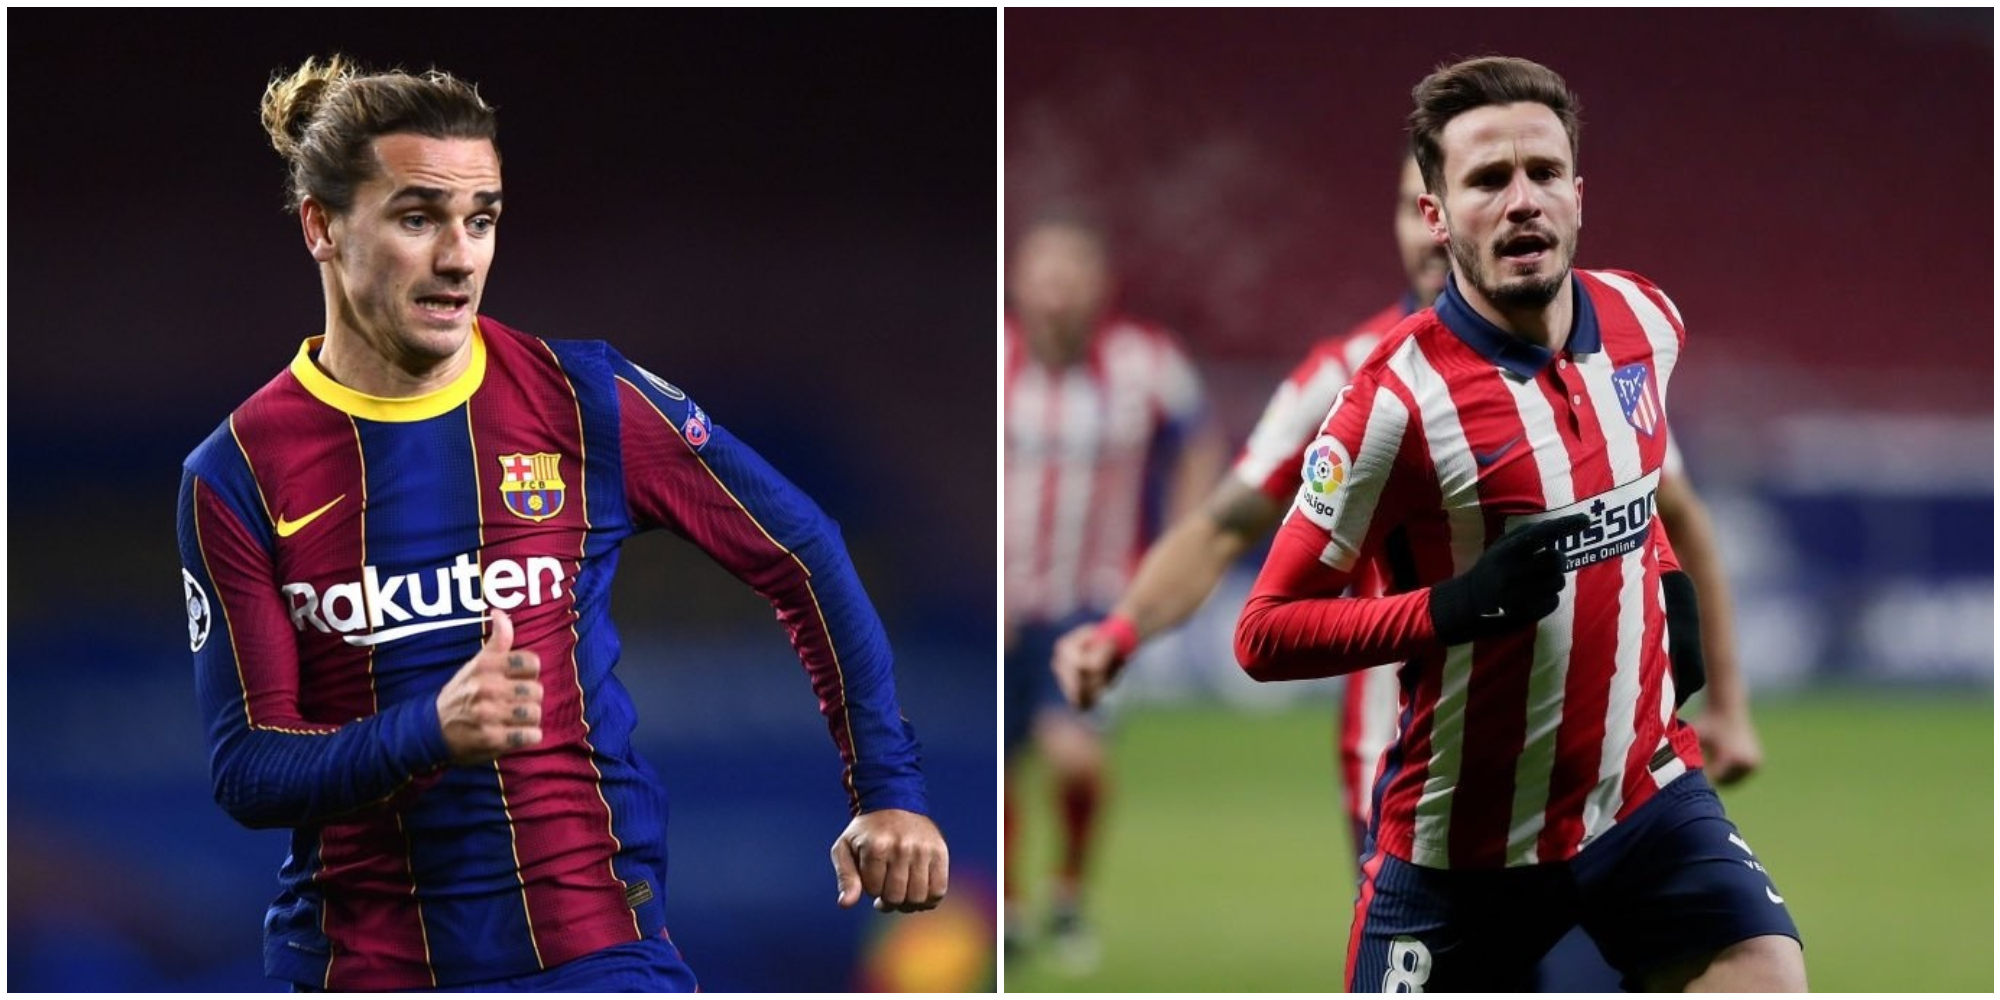 Exclusive: Liverpool are interested in Saul Niguez as Griezmann discontent threatens Barcelona swap deal